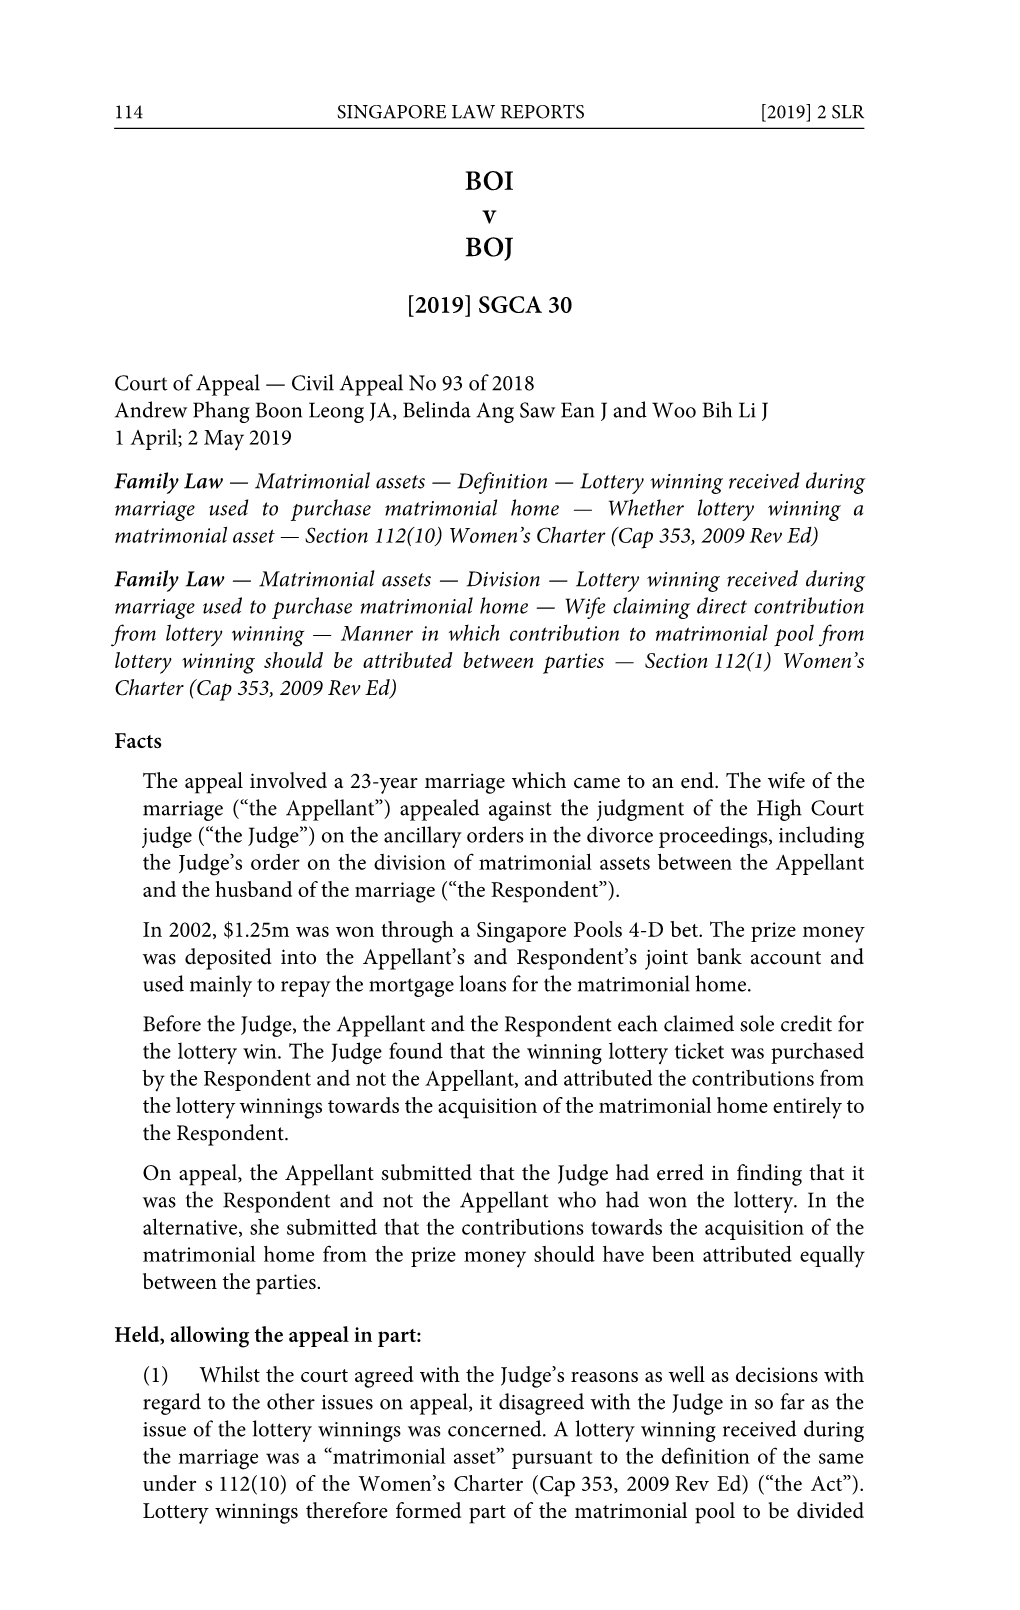 [2019] 2 SLR (CA) Part 1 Cases.Book Page 114 Wednesday, August 21, 2019 11:18 AM